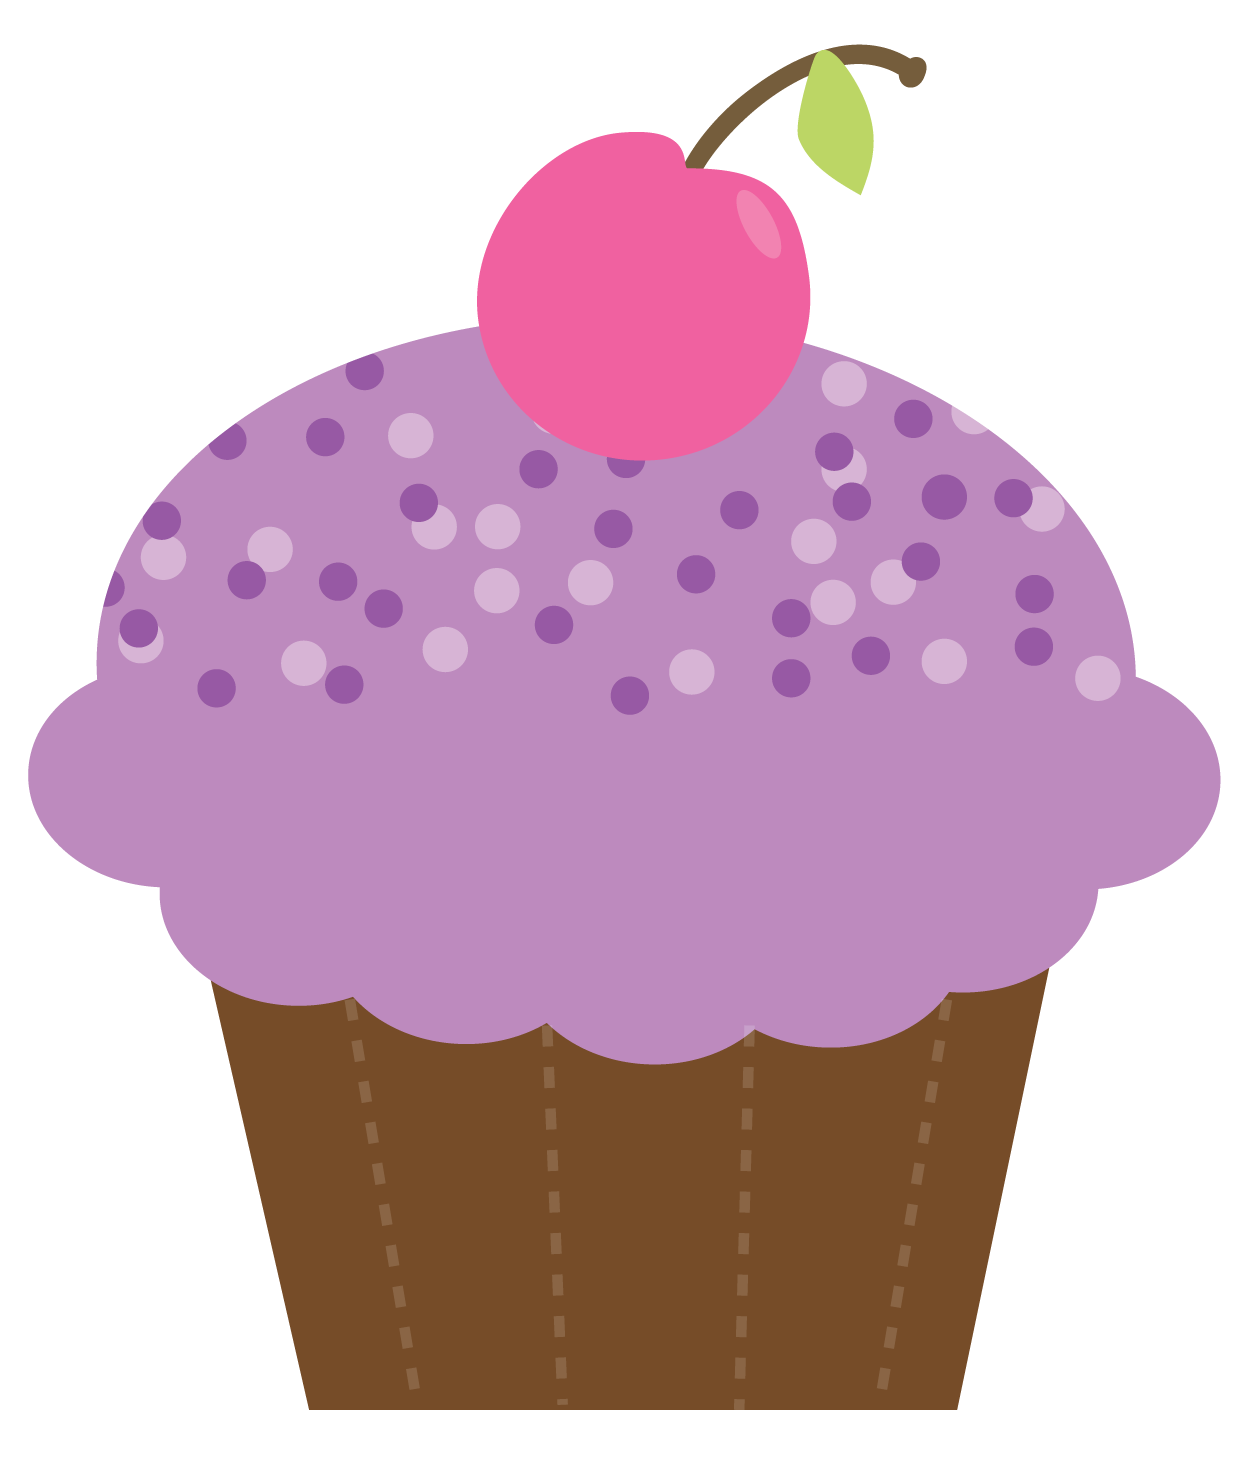 Happy Birthday Cupcake Clip Art and Nice Photo | Download Free ...